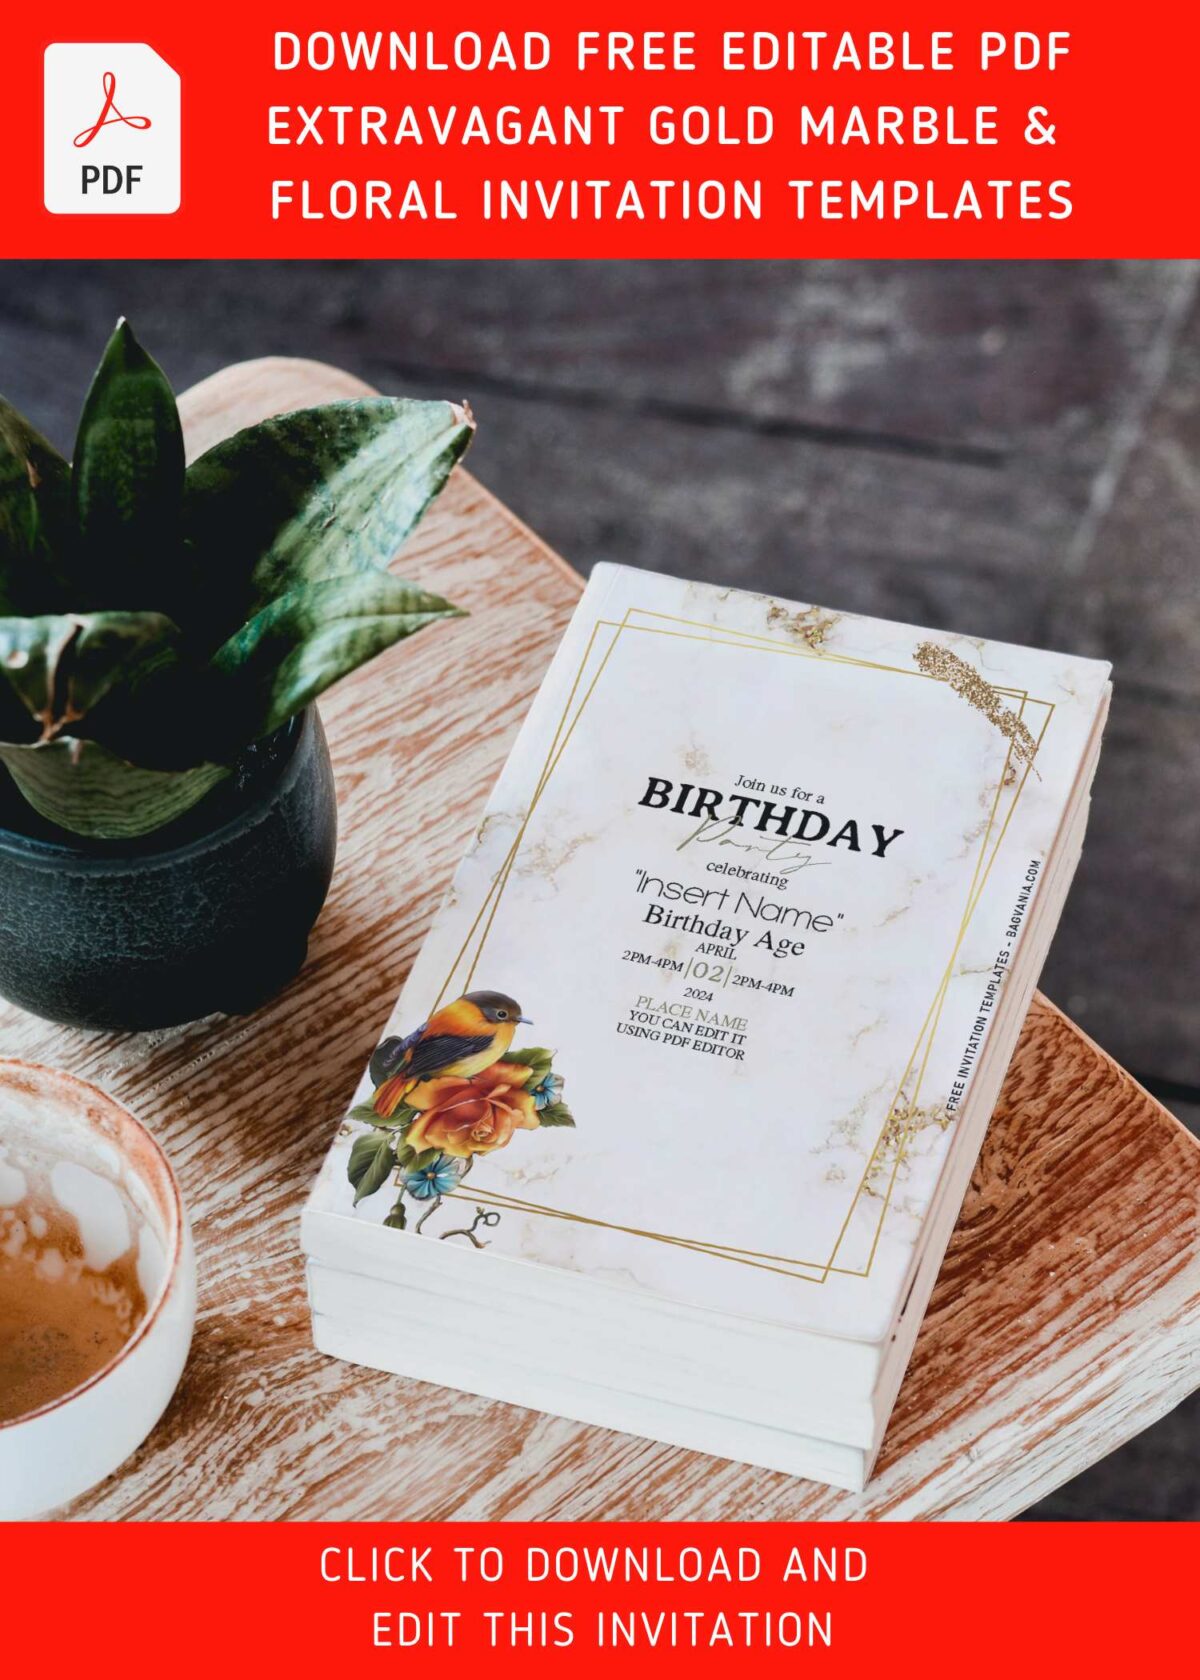 (Free Editable PDF) Charming Floral & Bird On Marble Birthday Invitation Templates with 